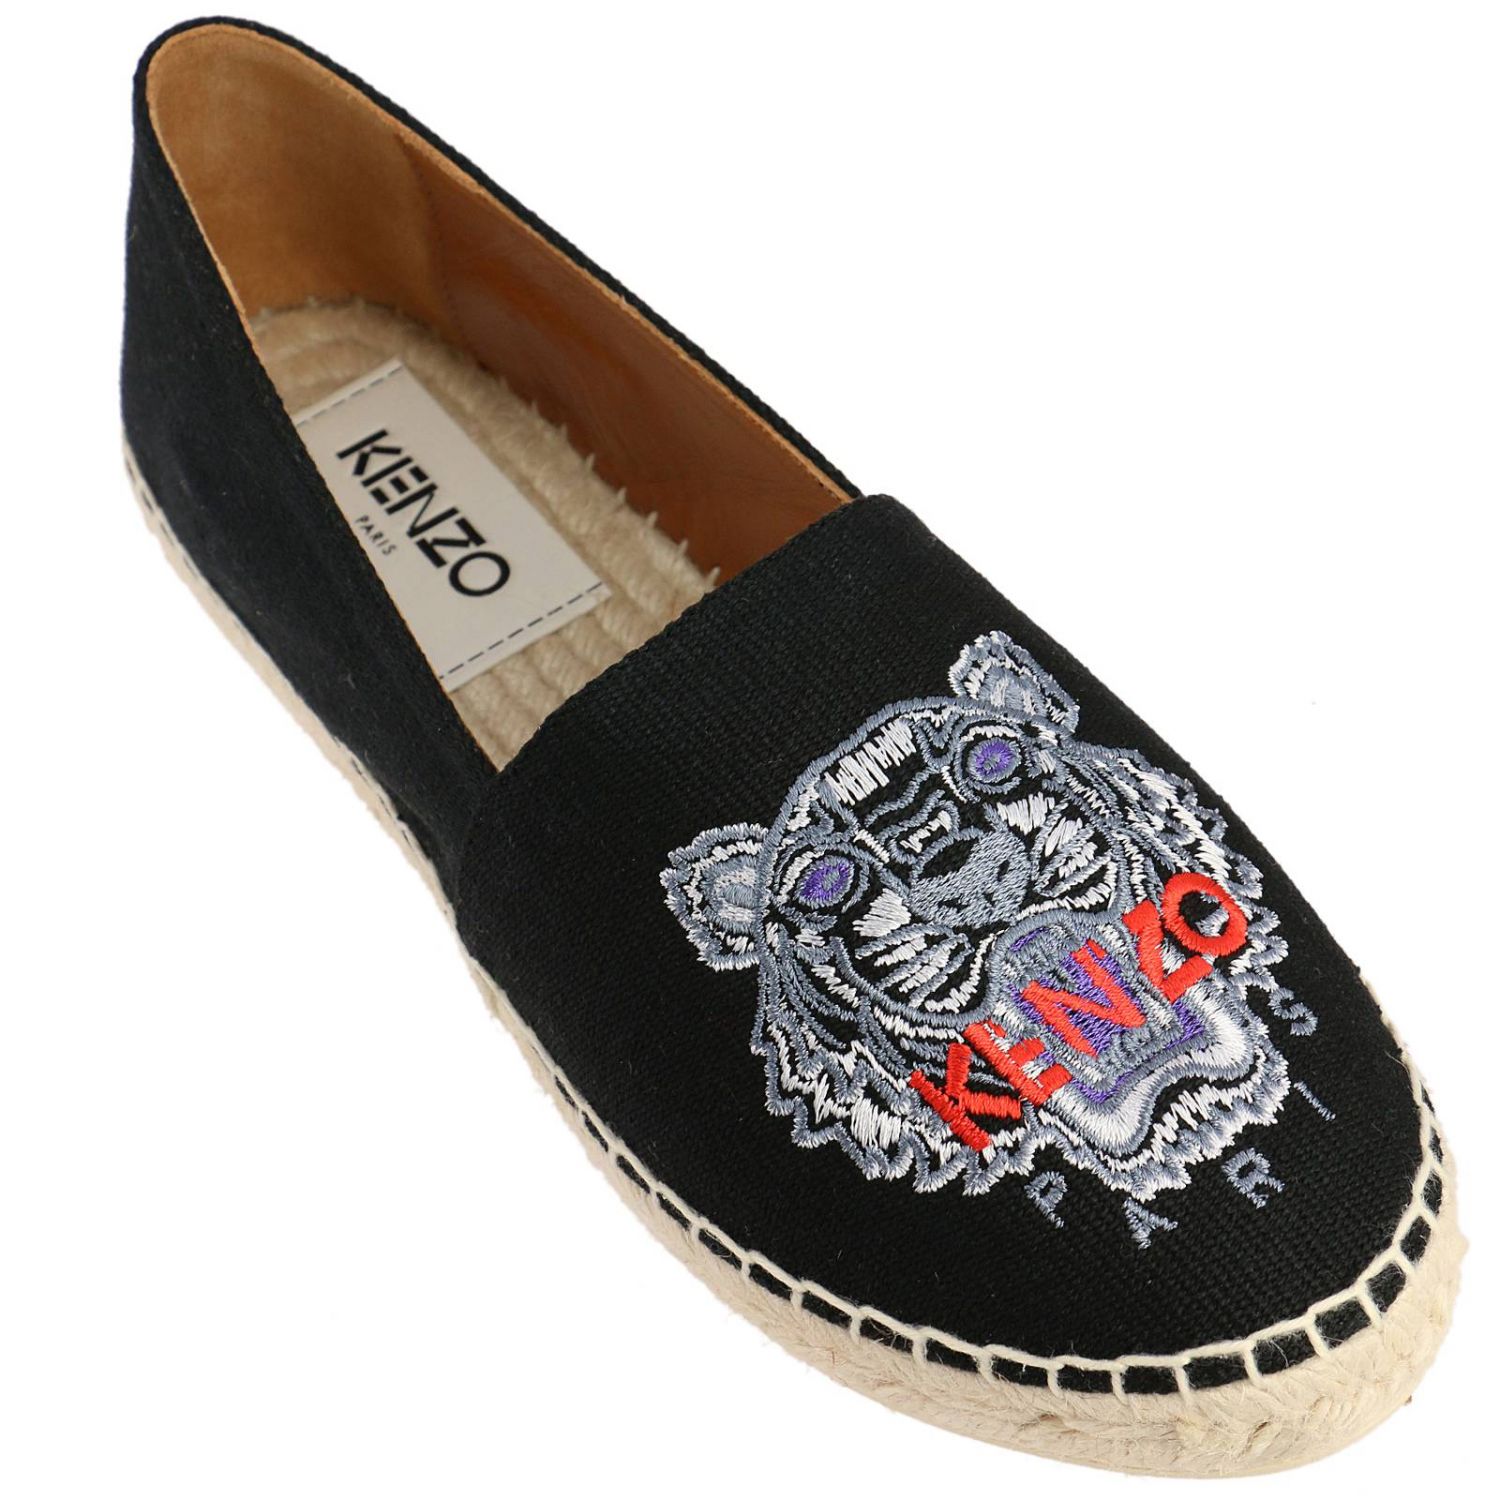 kenzo loafers